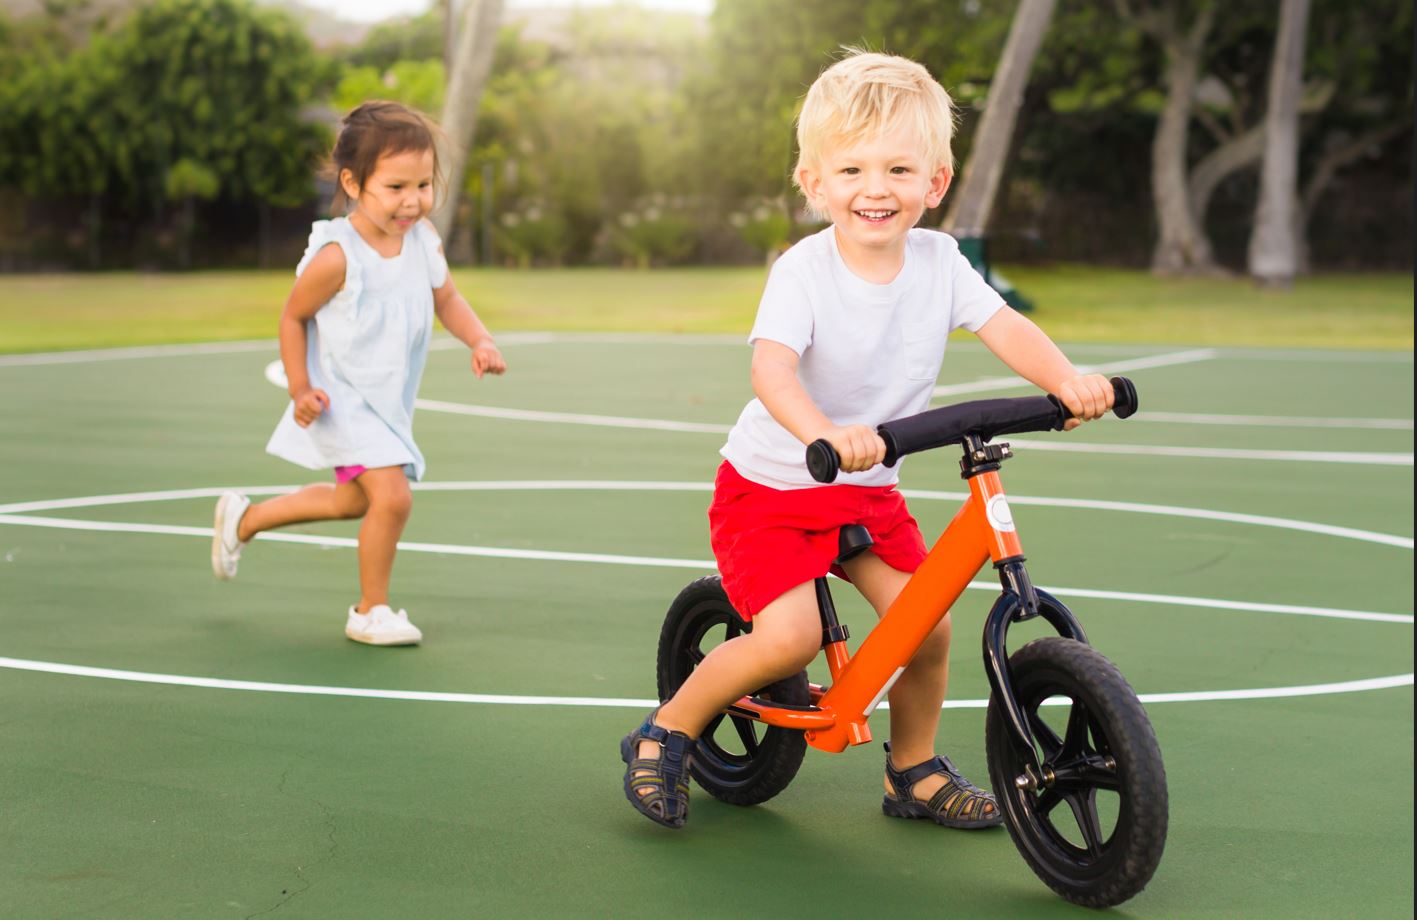 The importance of physical development in children